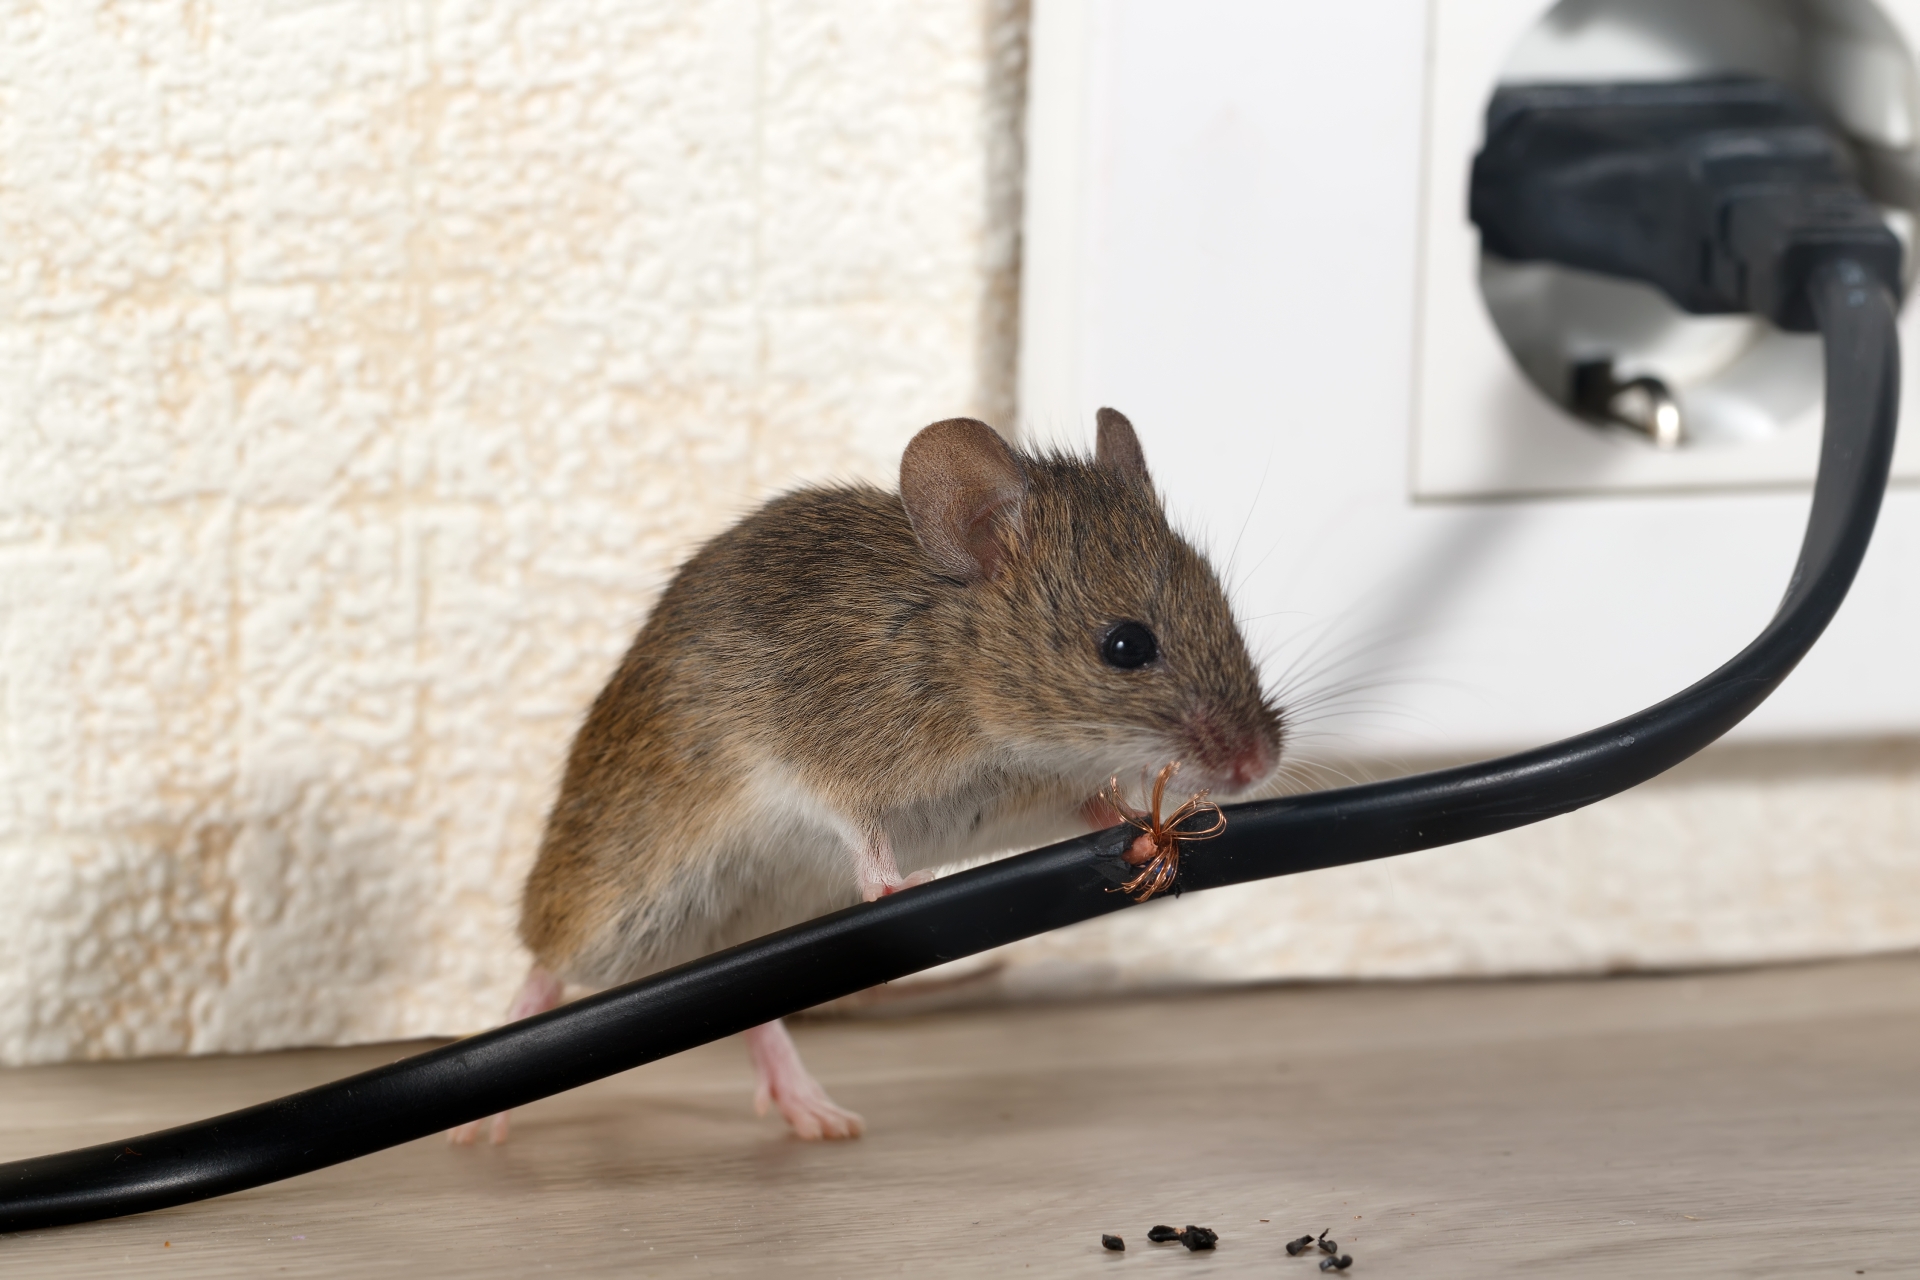 Mice Infestation, Pest Control in Sutton, Rose Hill, SM1. Call Now 020 8166 9746